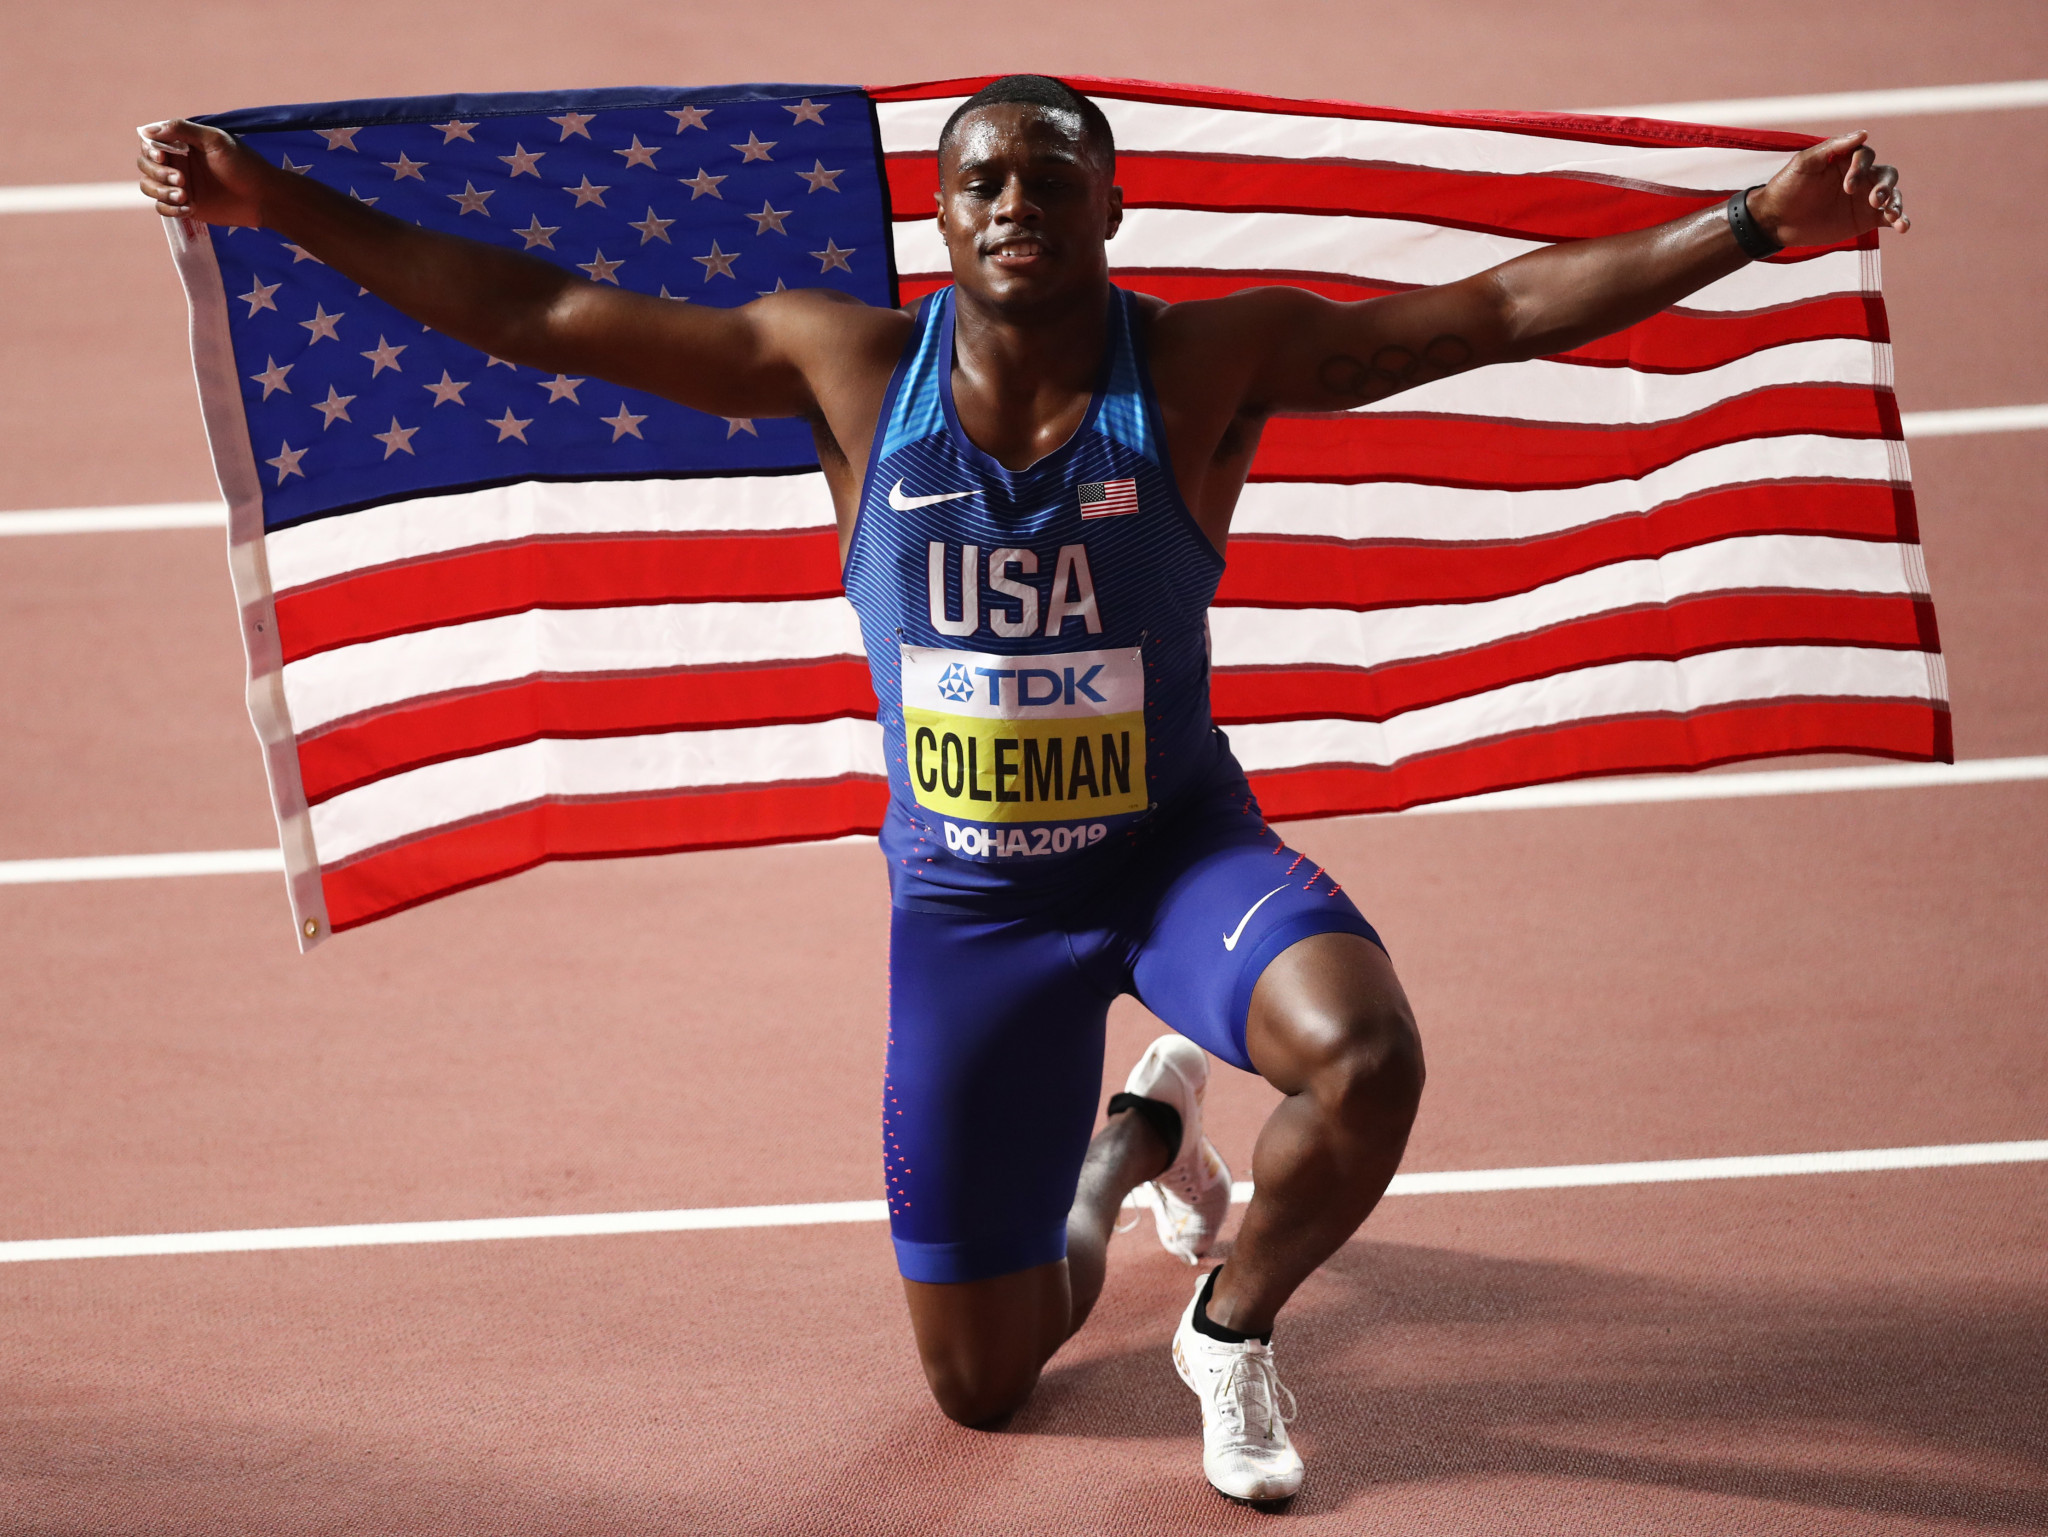 Christian Coleman, the 100m world champion, has had a doping ban reduced to 18 months on appeal ©Getty Images